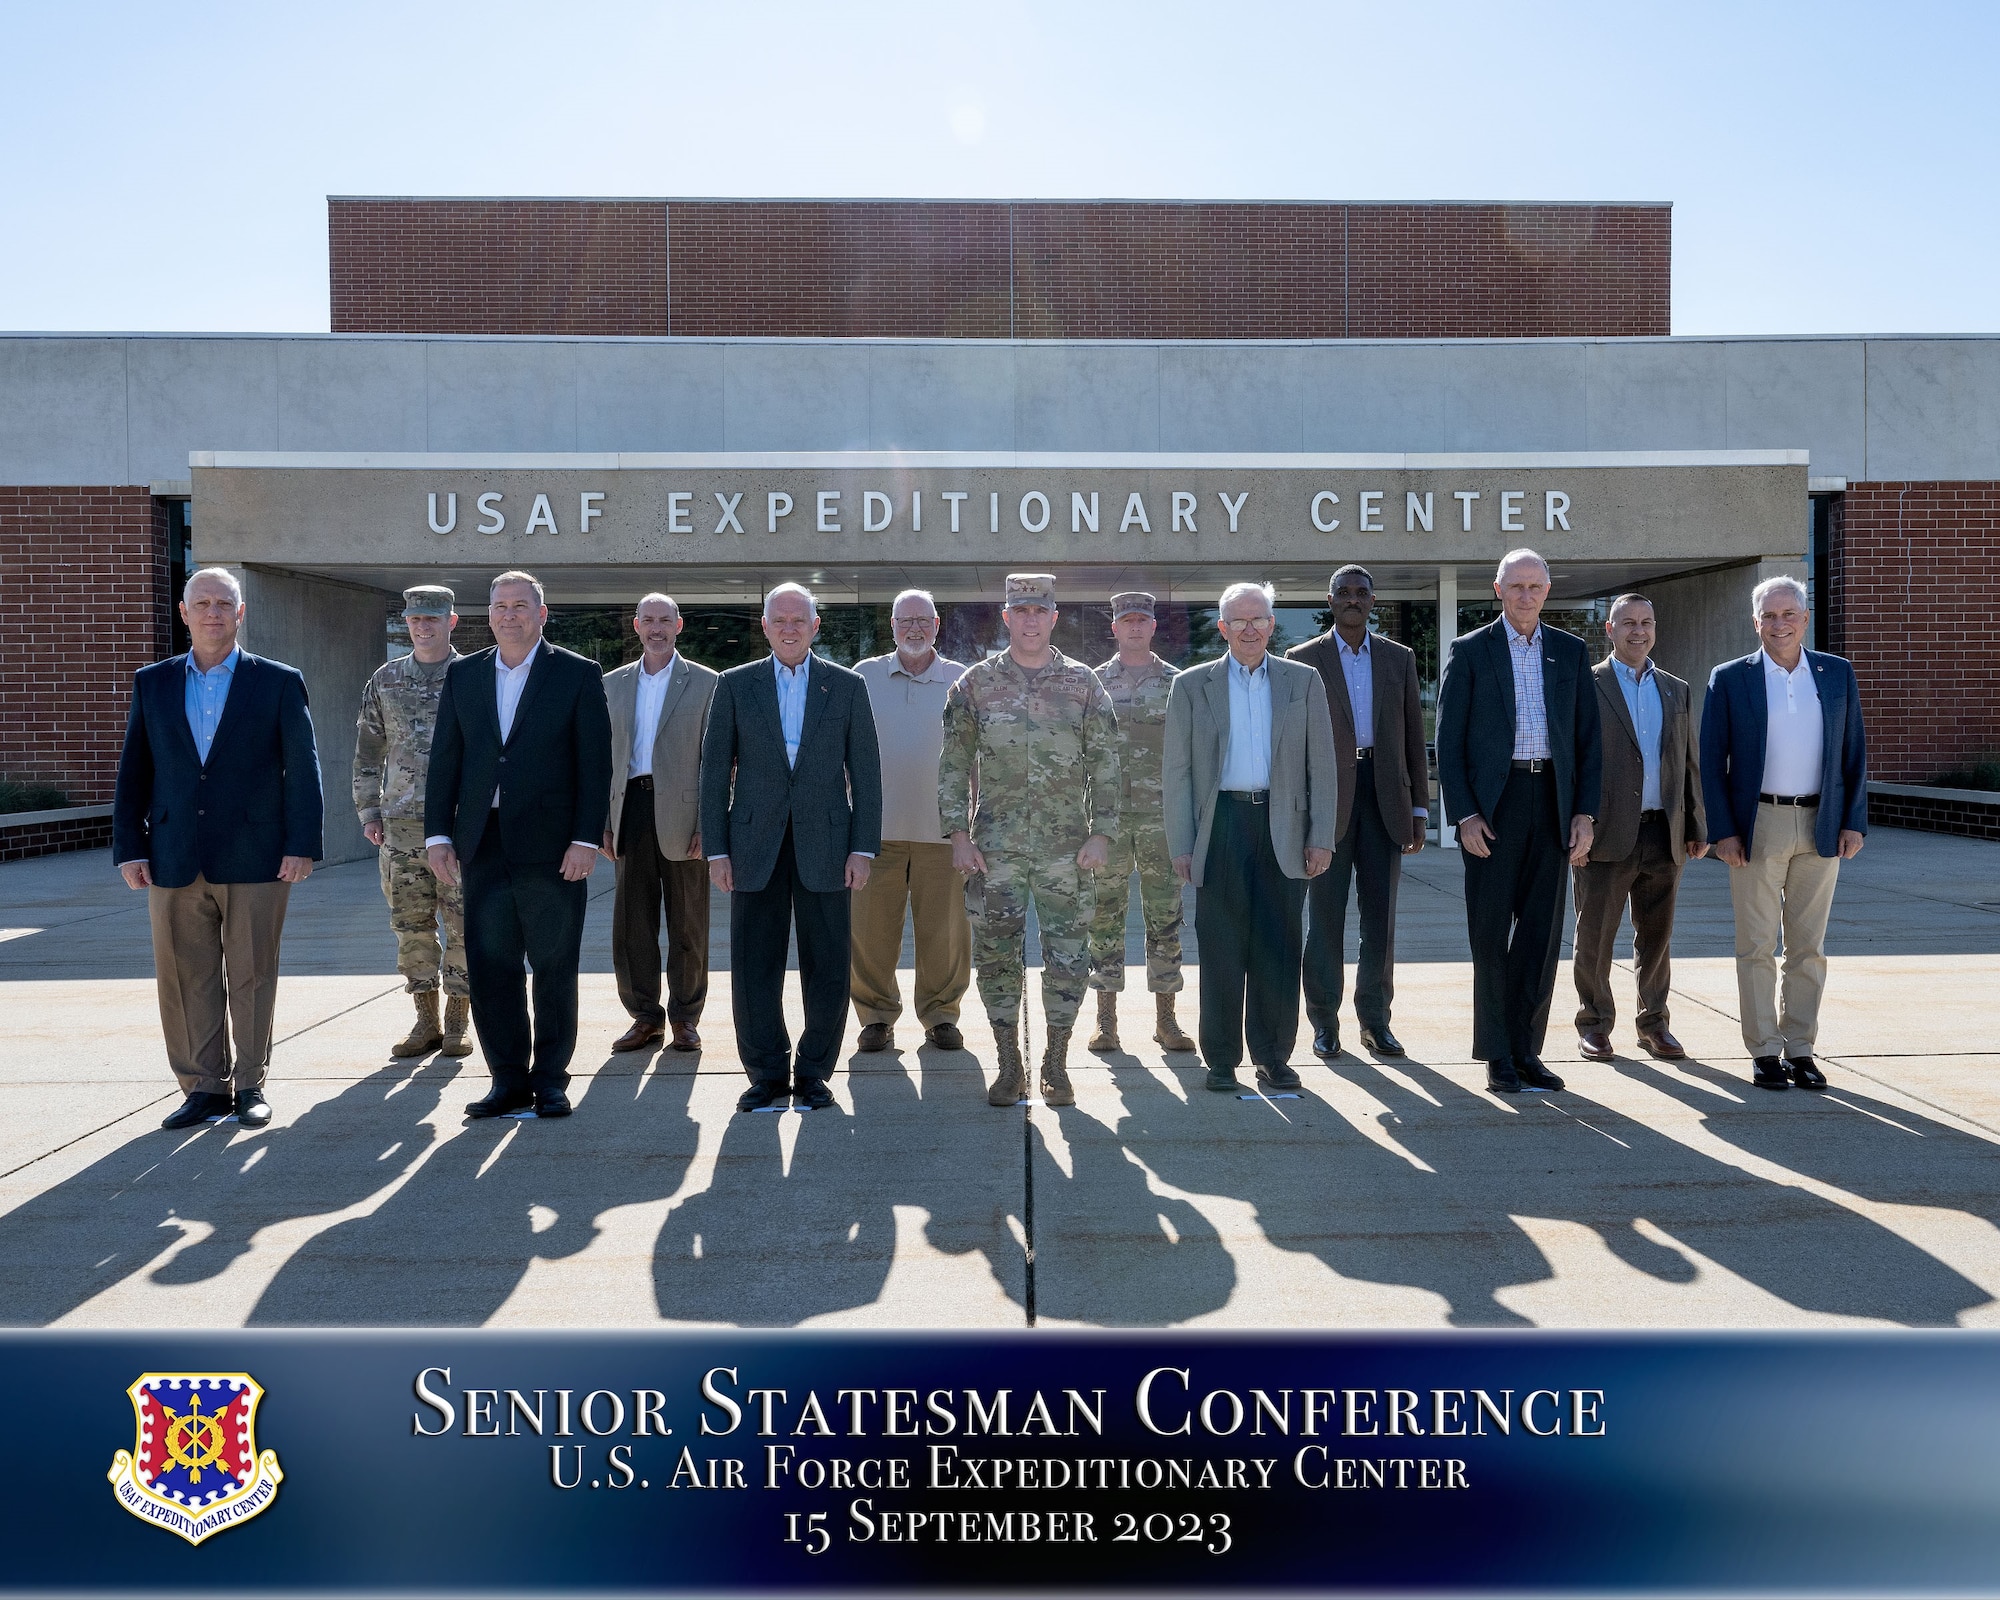 USAFEC welcomes previous leaders for Senior Statesman Conference